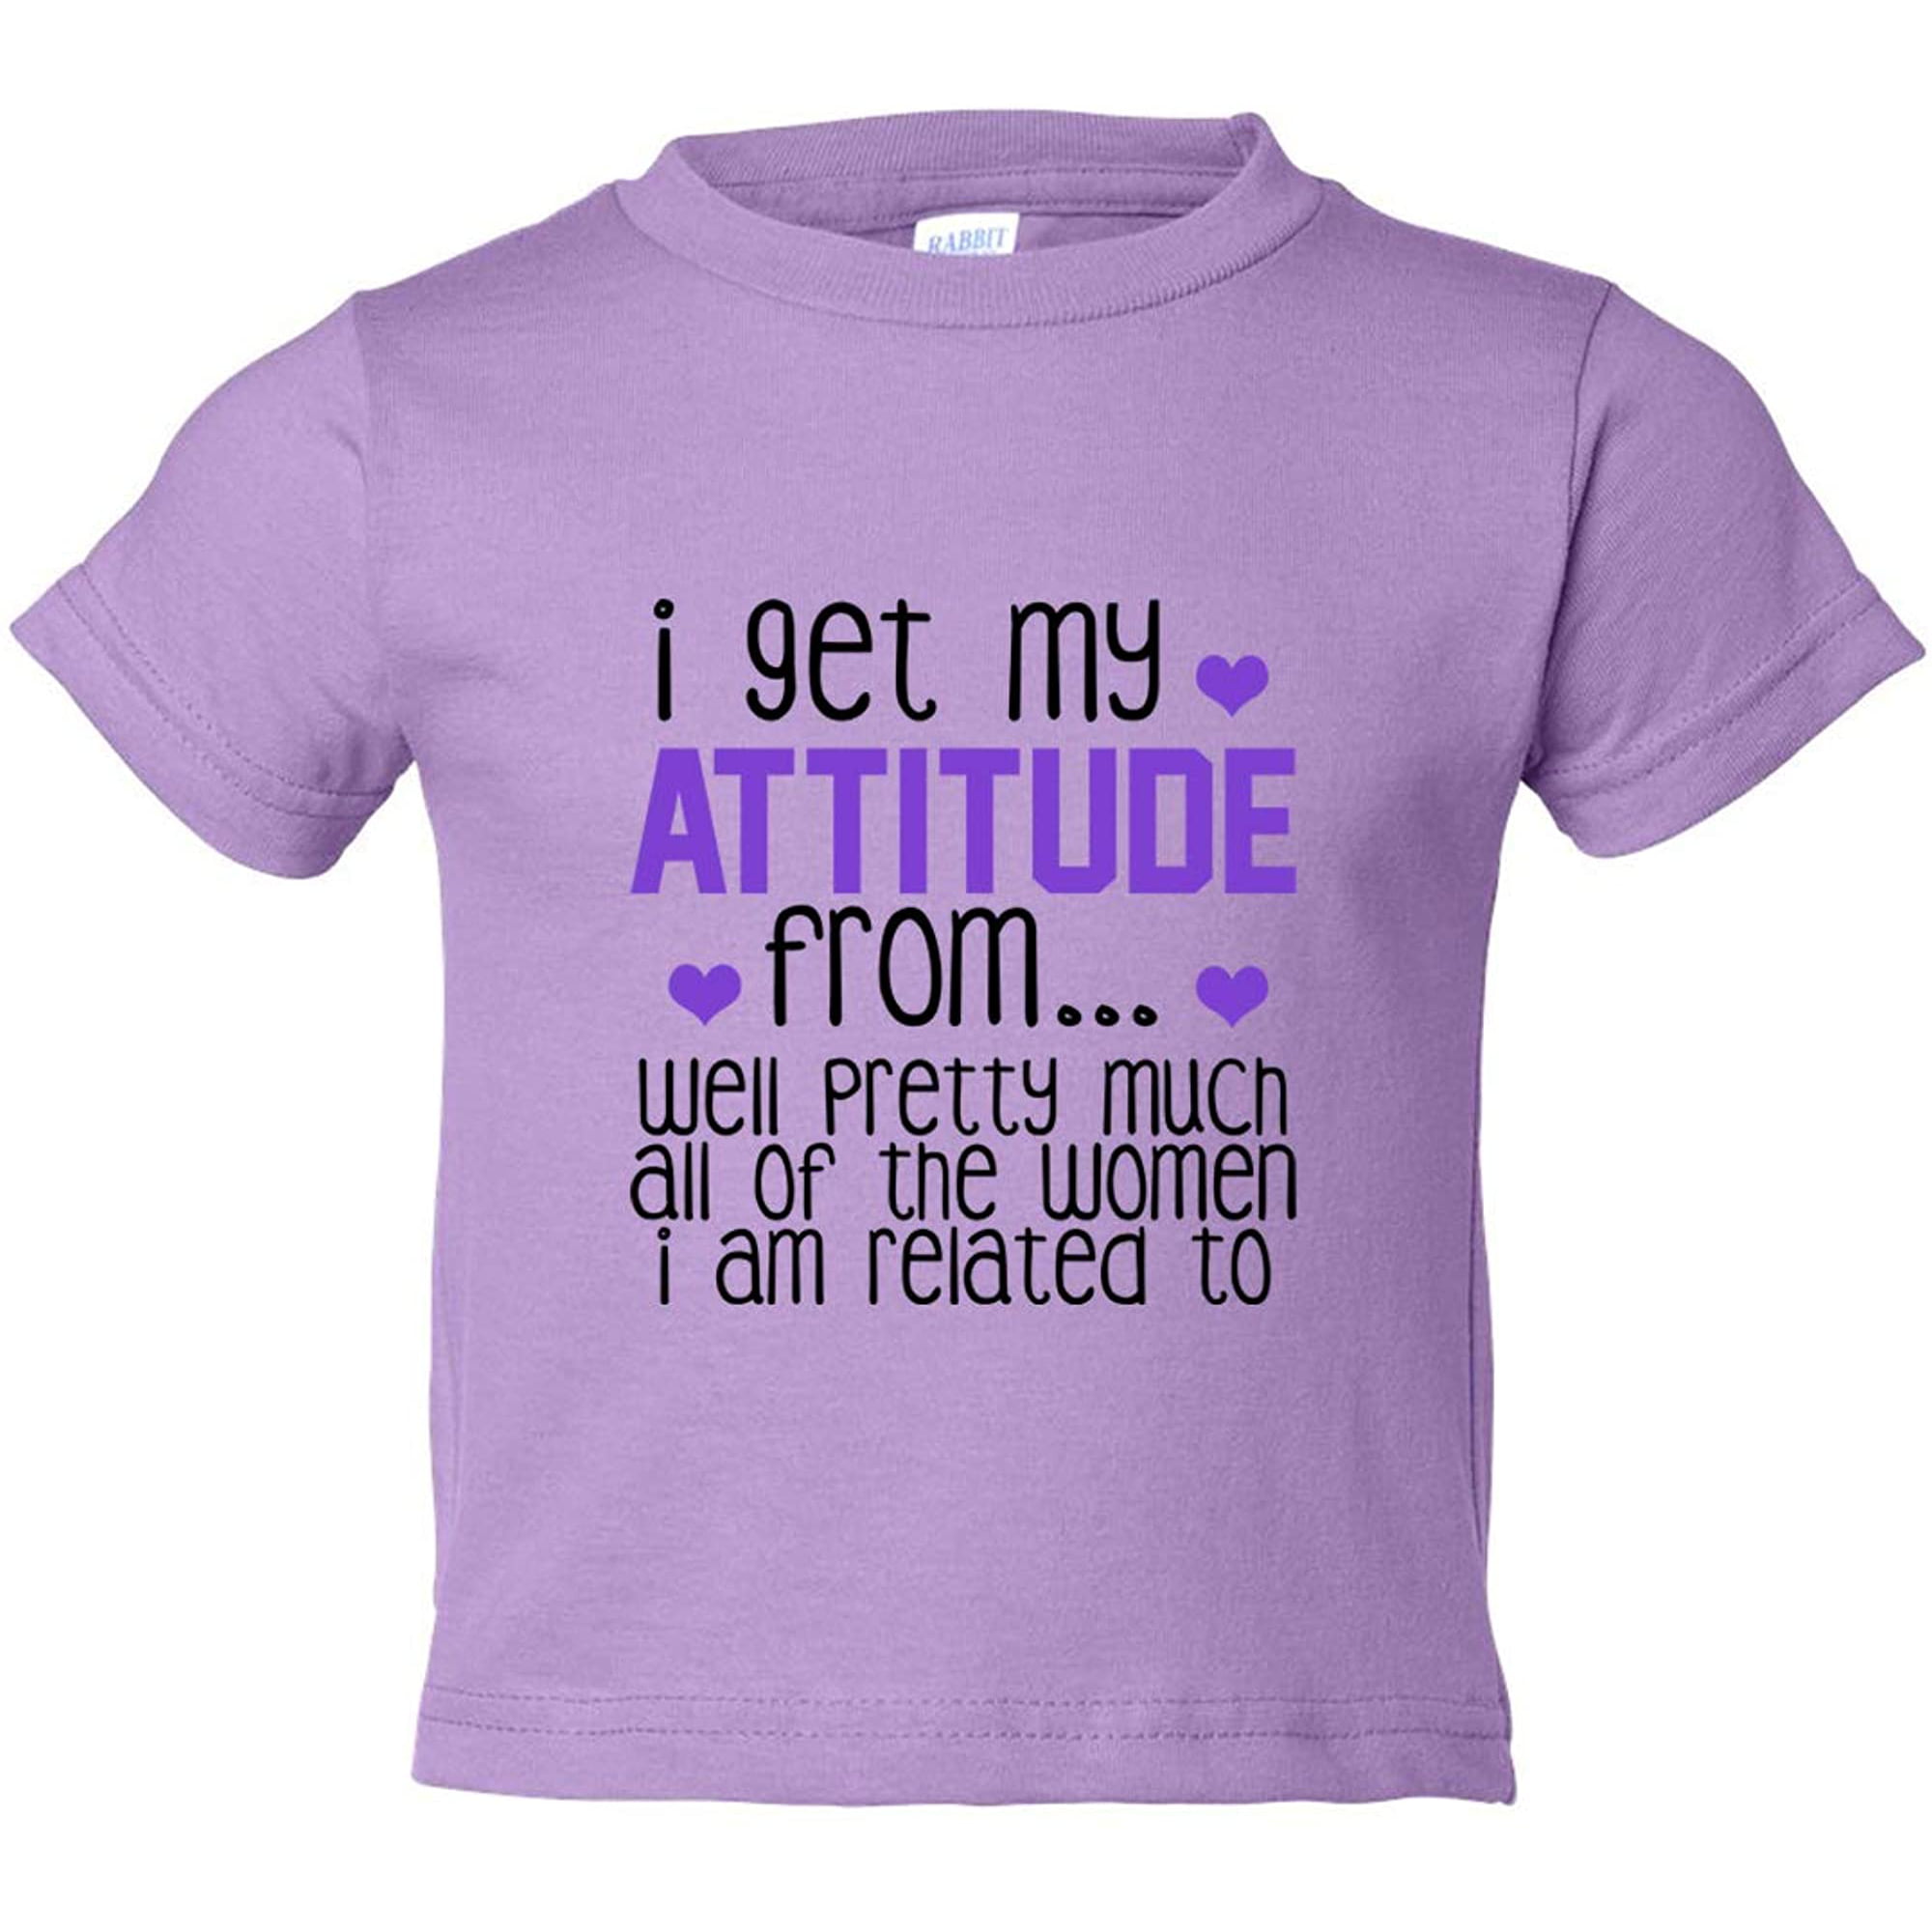 Girls Funny Family I Get My Attitude from Well Pretty Much. Toddler Shirt |  Walmart Canada